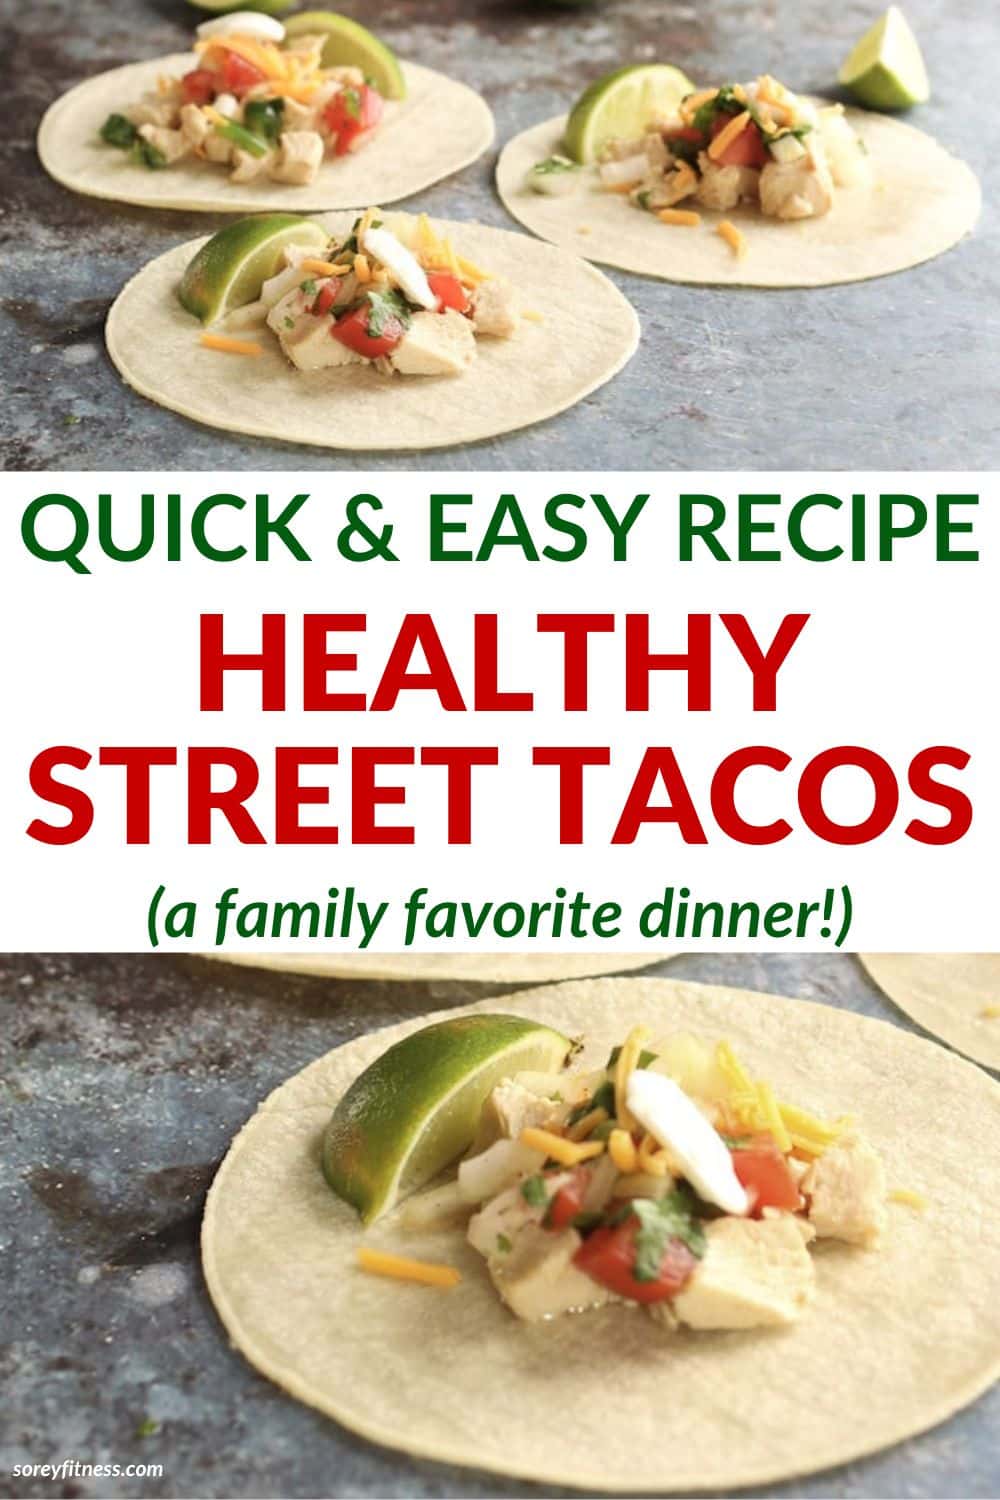 collage of assembled healthy street tacos - text overlay in the middle says quick and easy healthy street tacos - a family favorite dinner